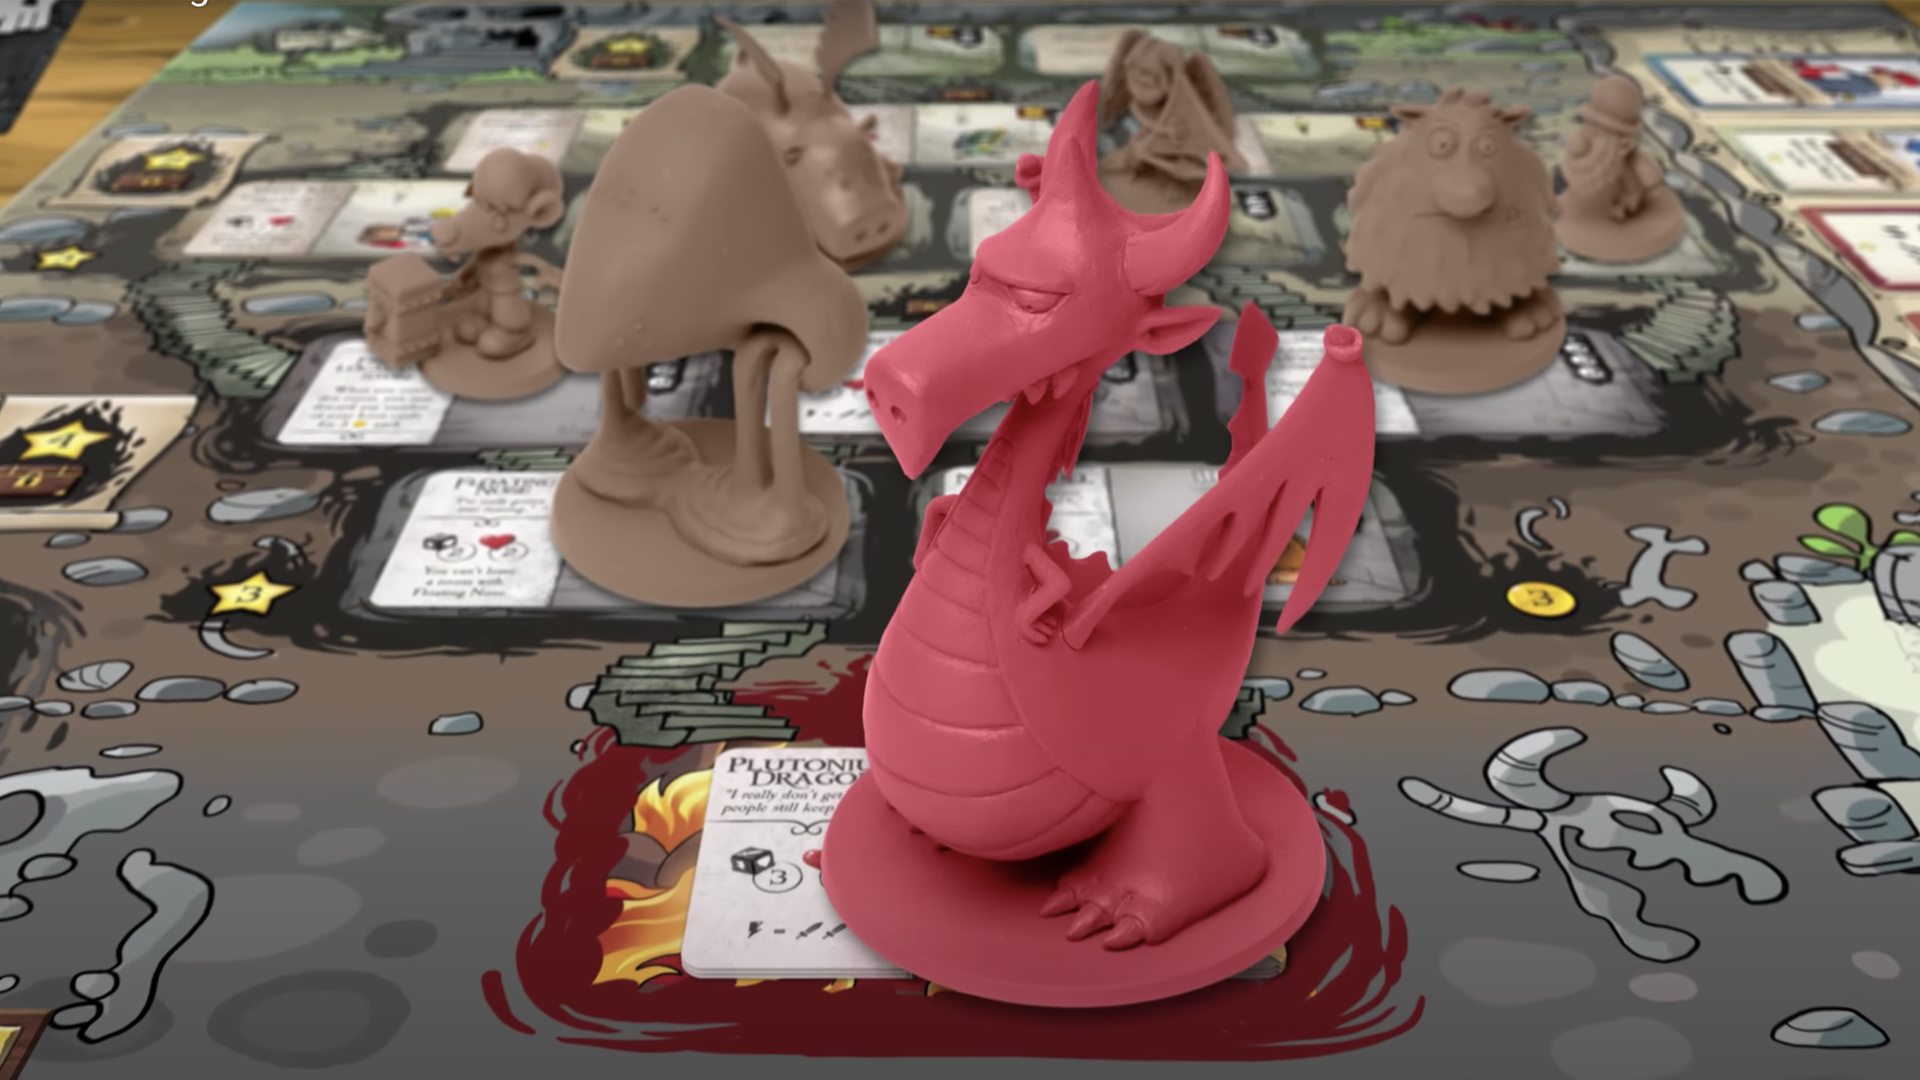 Image for Munchkin Dungeon, a new board game based on the hit party game, is out this week